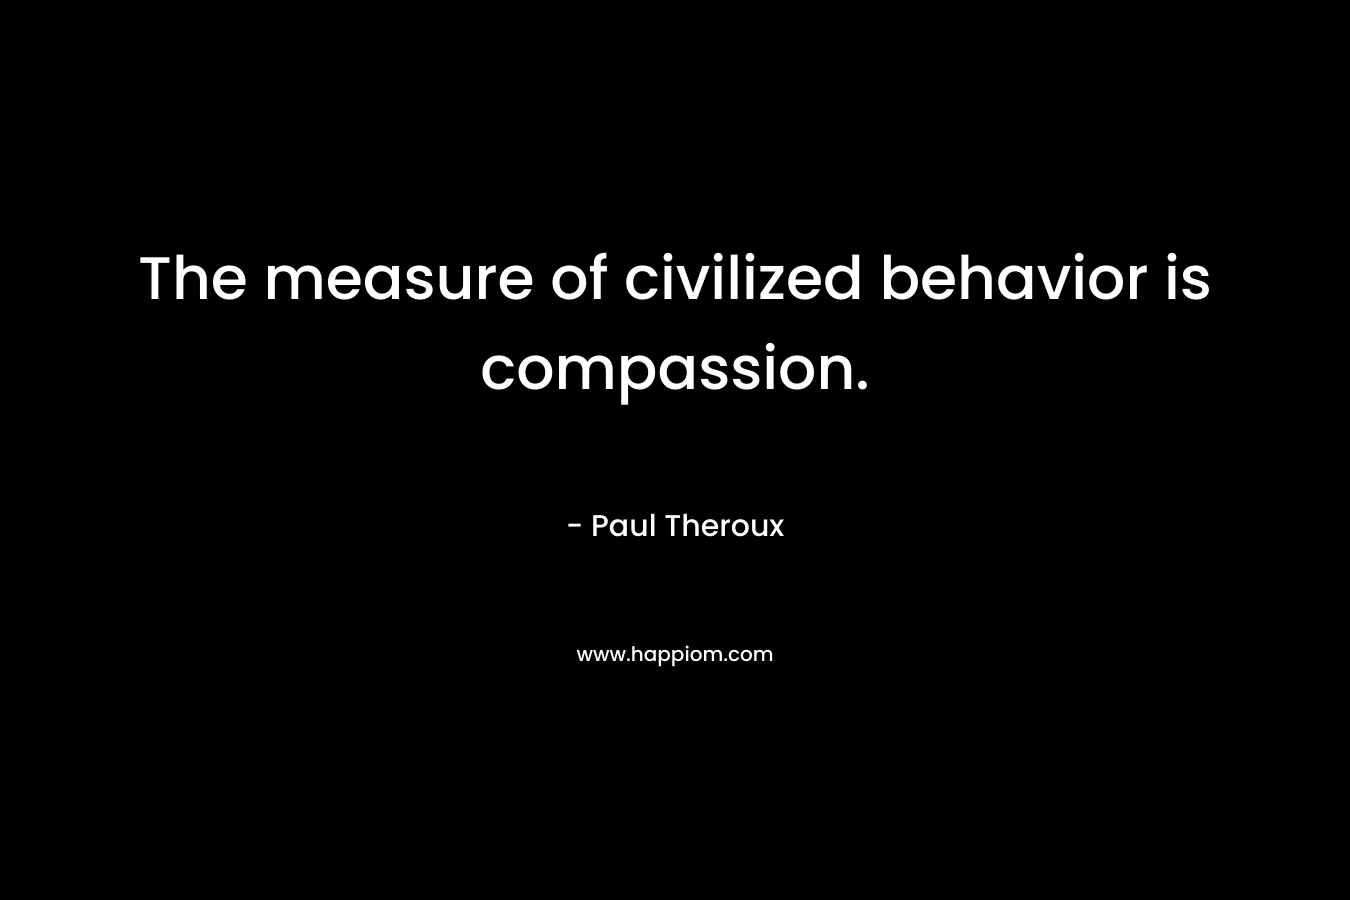 The measure of civilized behavior is compassion. – Paul Theroux